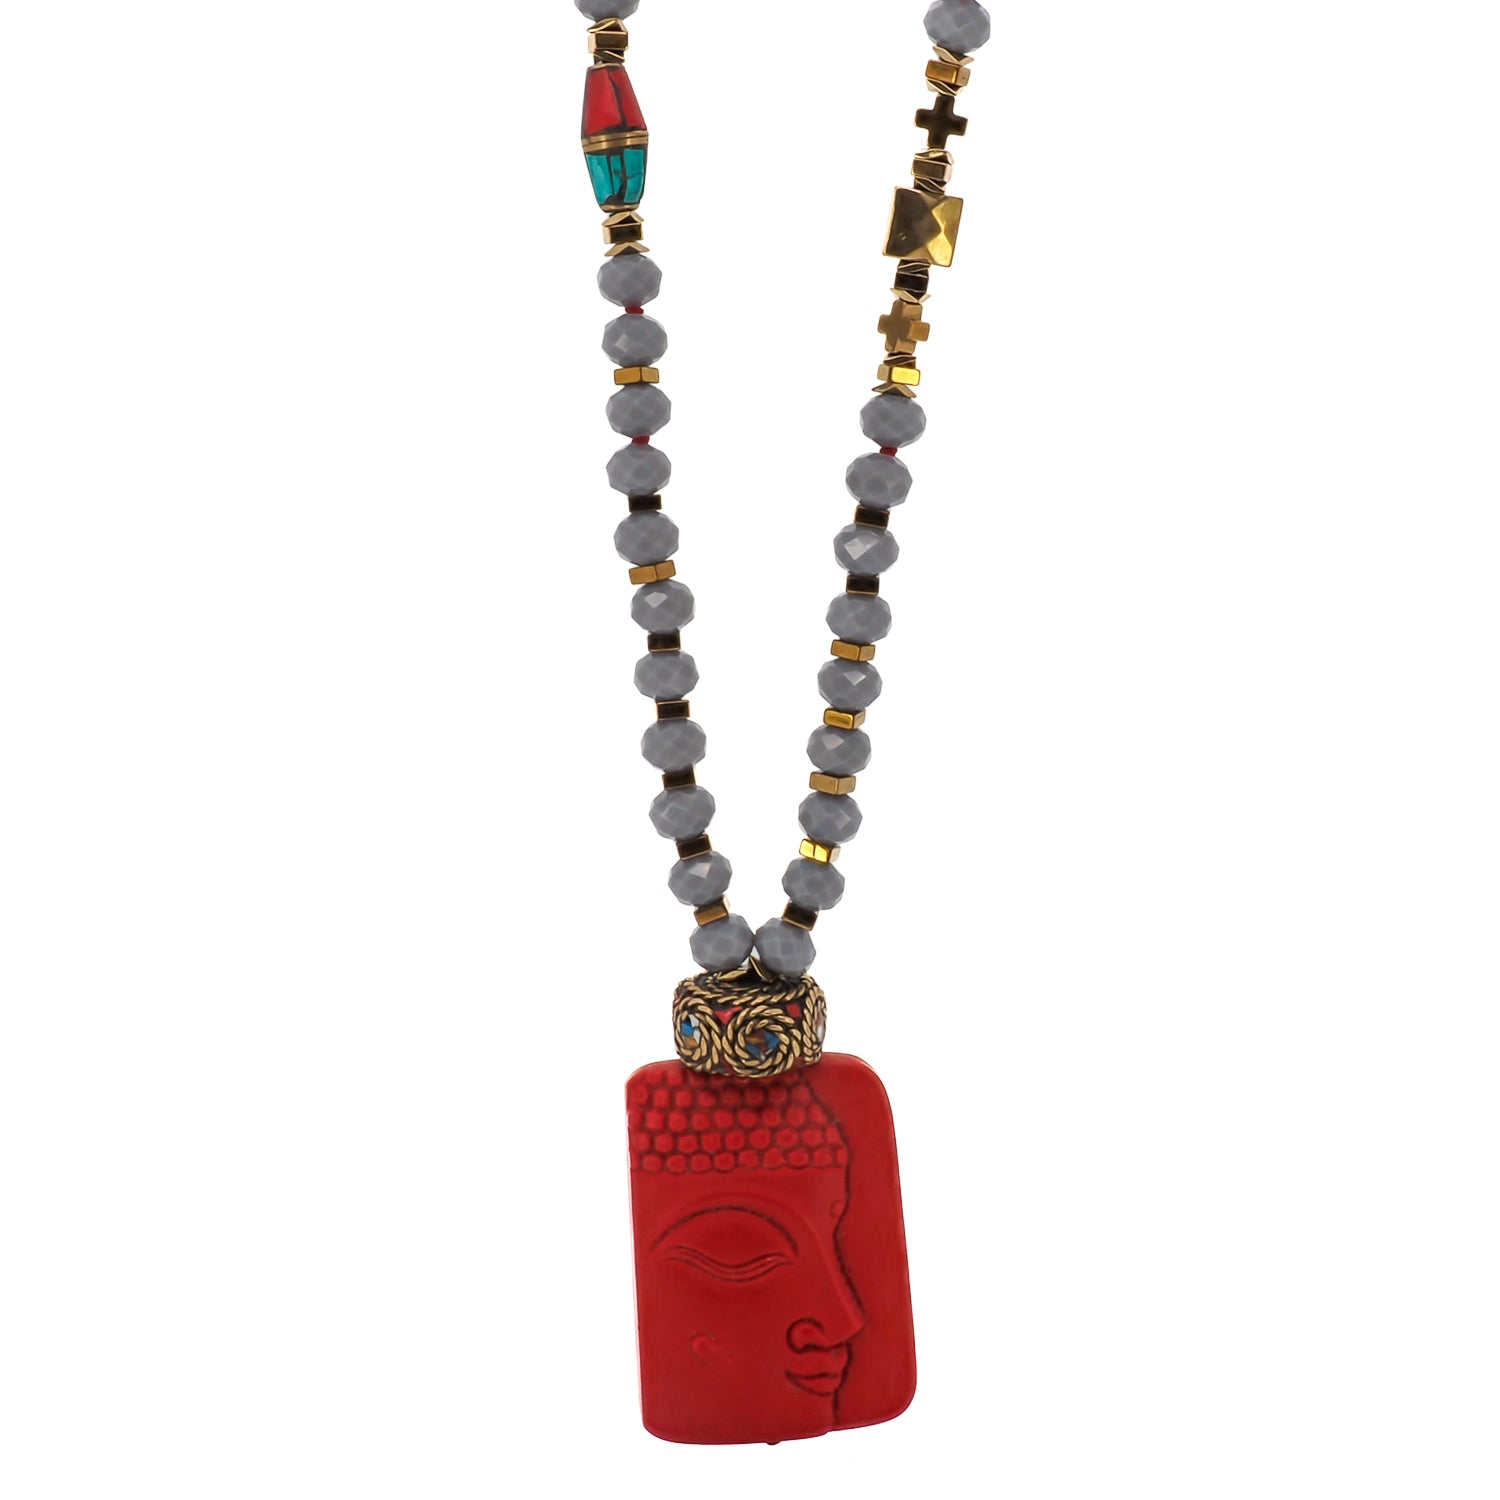 Calmness Buddha Necklace with Crystal Beads and Hand-Carved Pendant